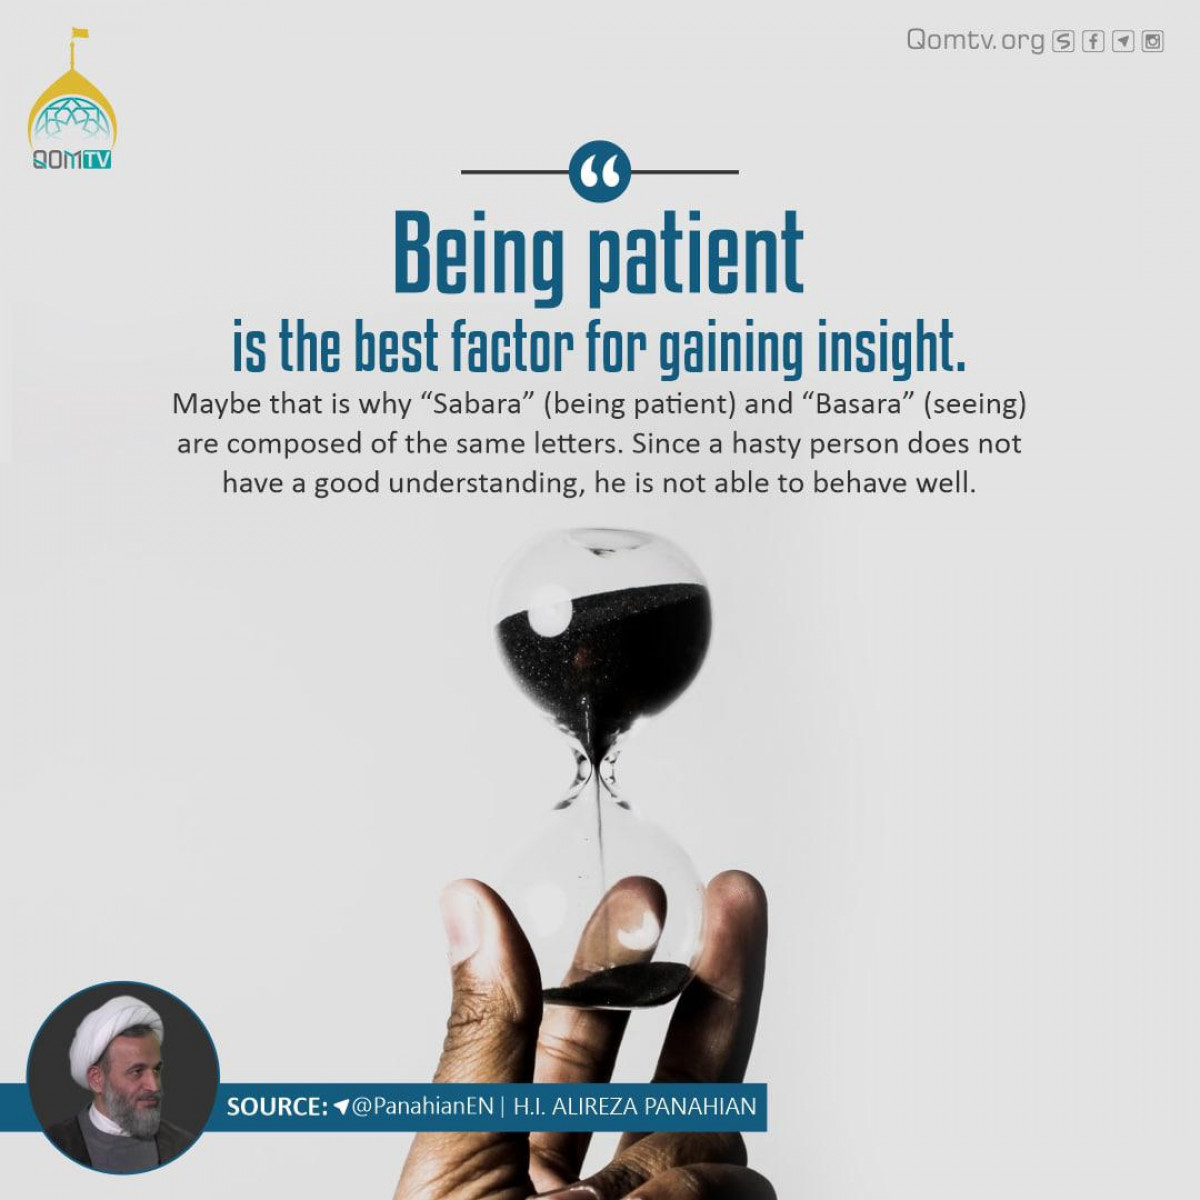 Being patient is the best factor for gaining insight